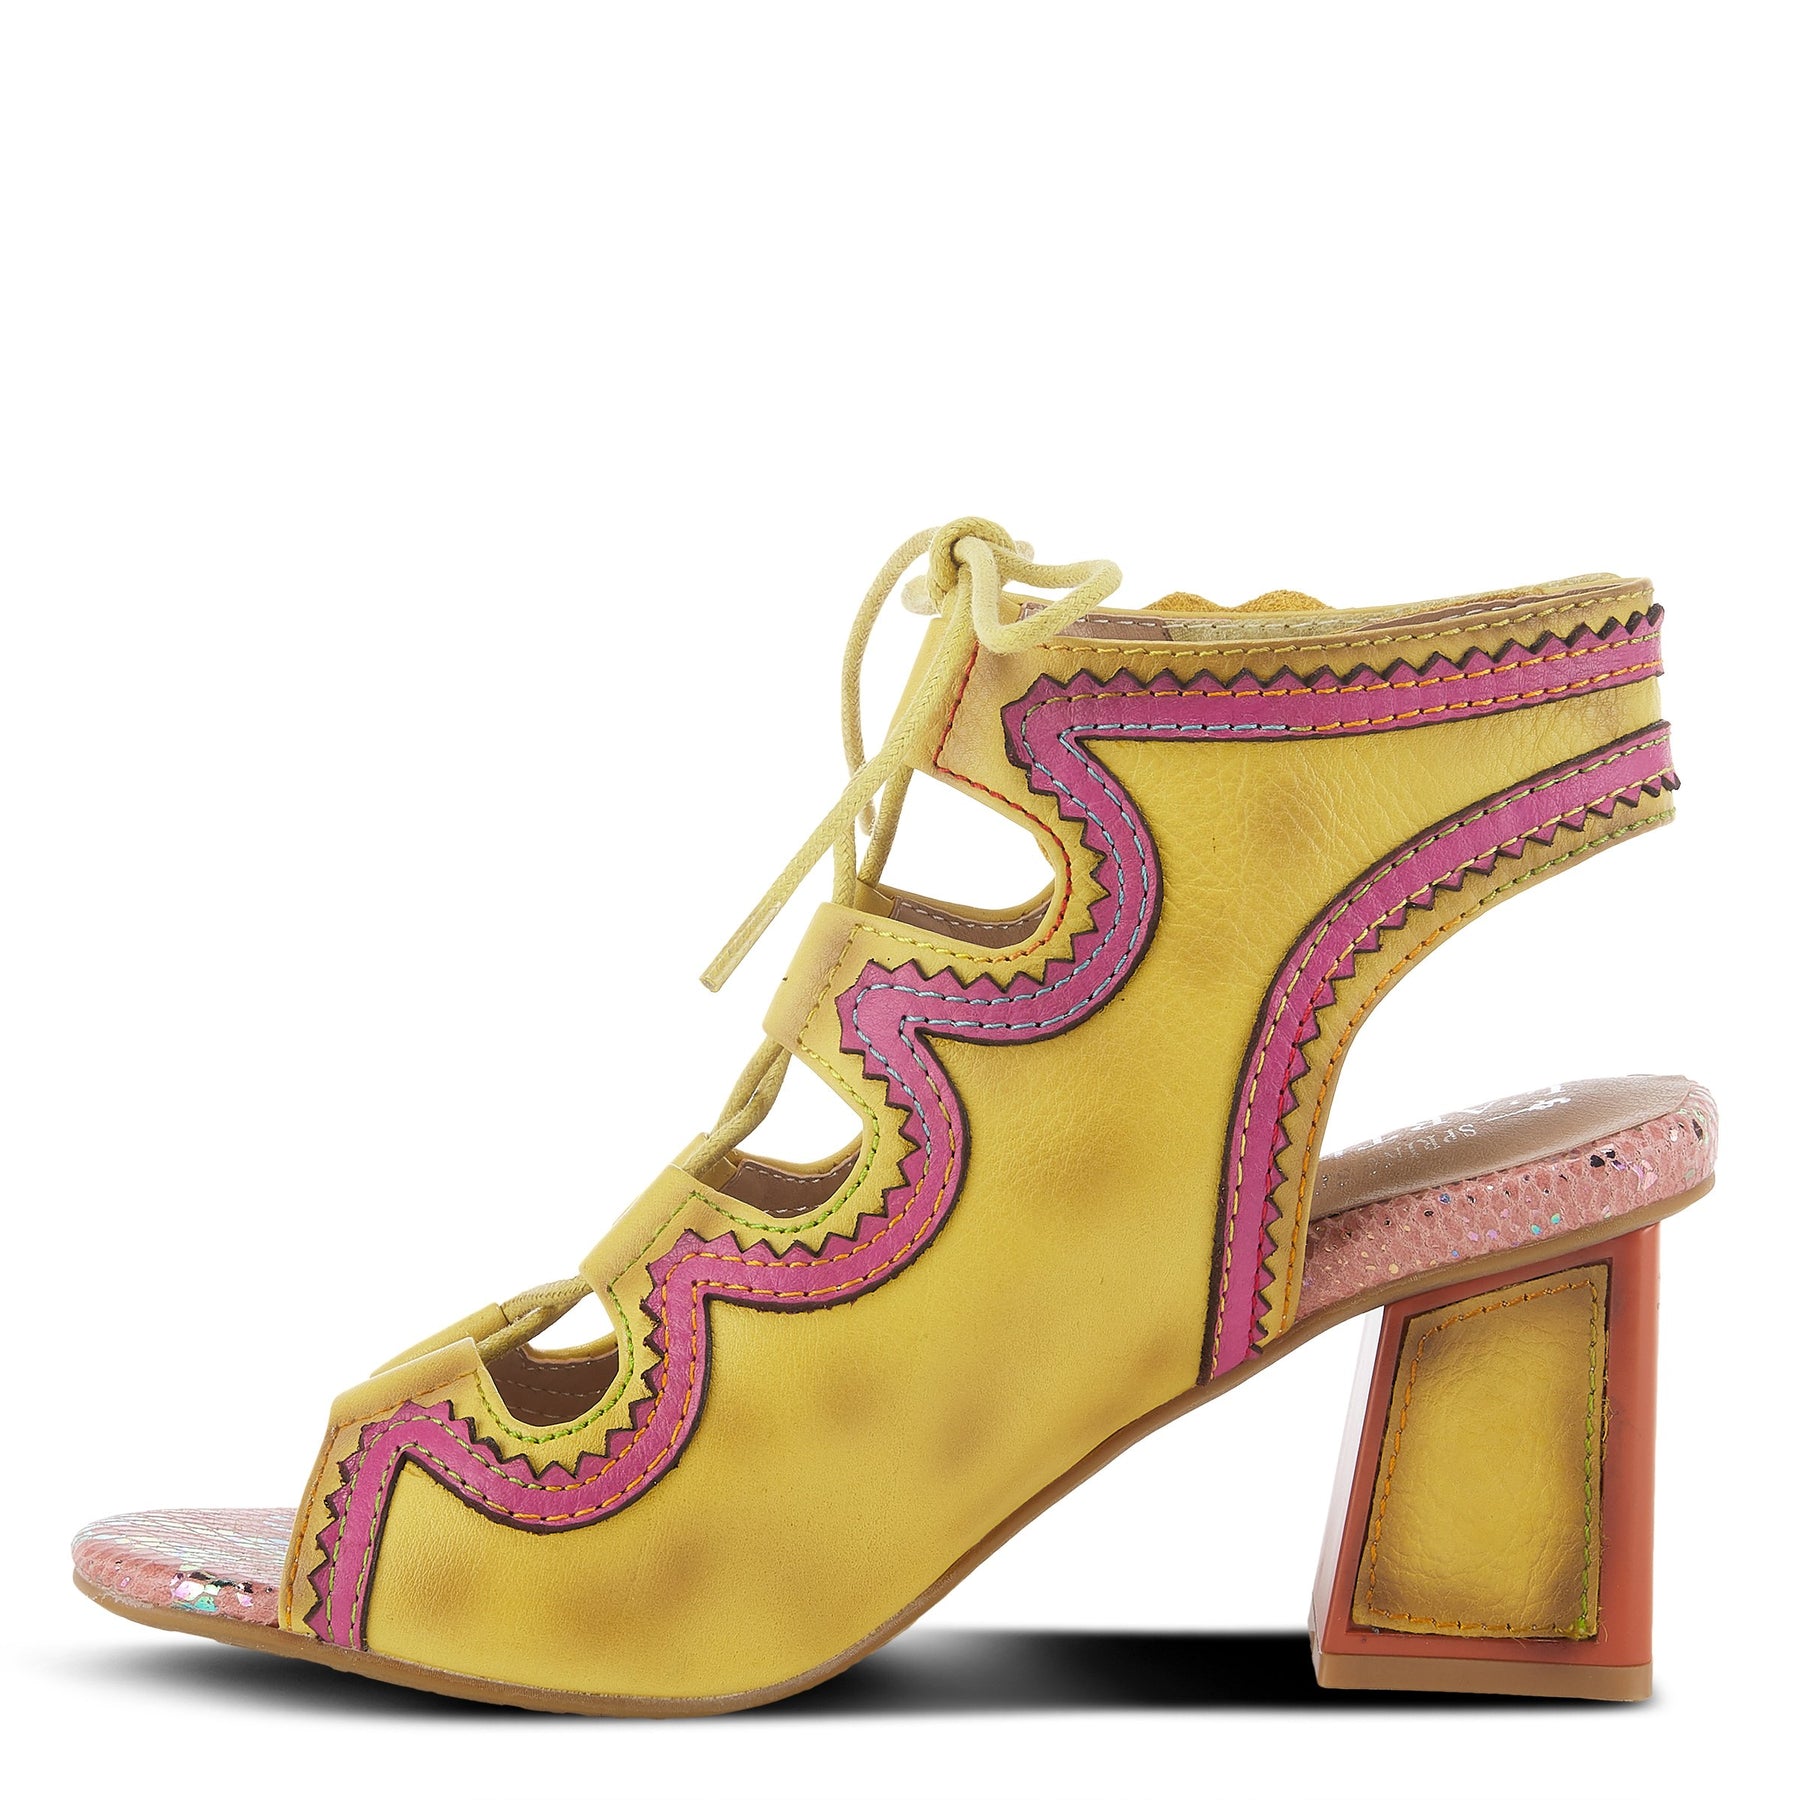 SUPERCUTE ANKLE STRAP SANDAL by L'ARTISTE – Spring Step Shoes